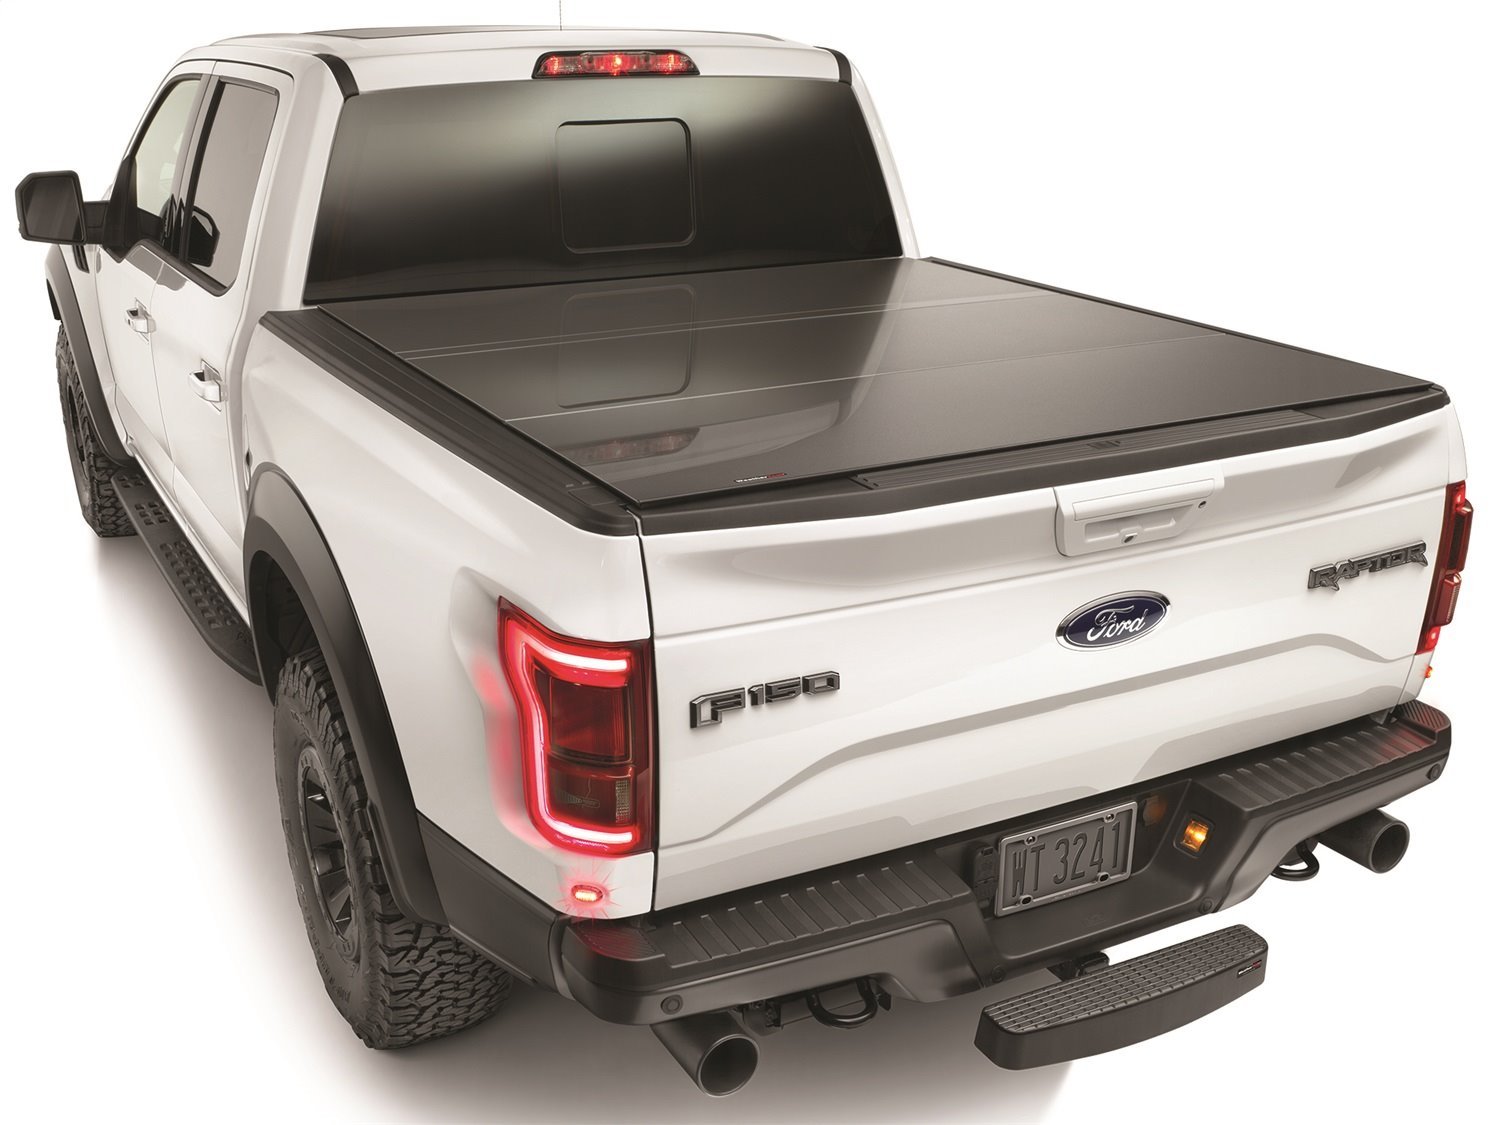 ALLOYCOVER TRUCK BED